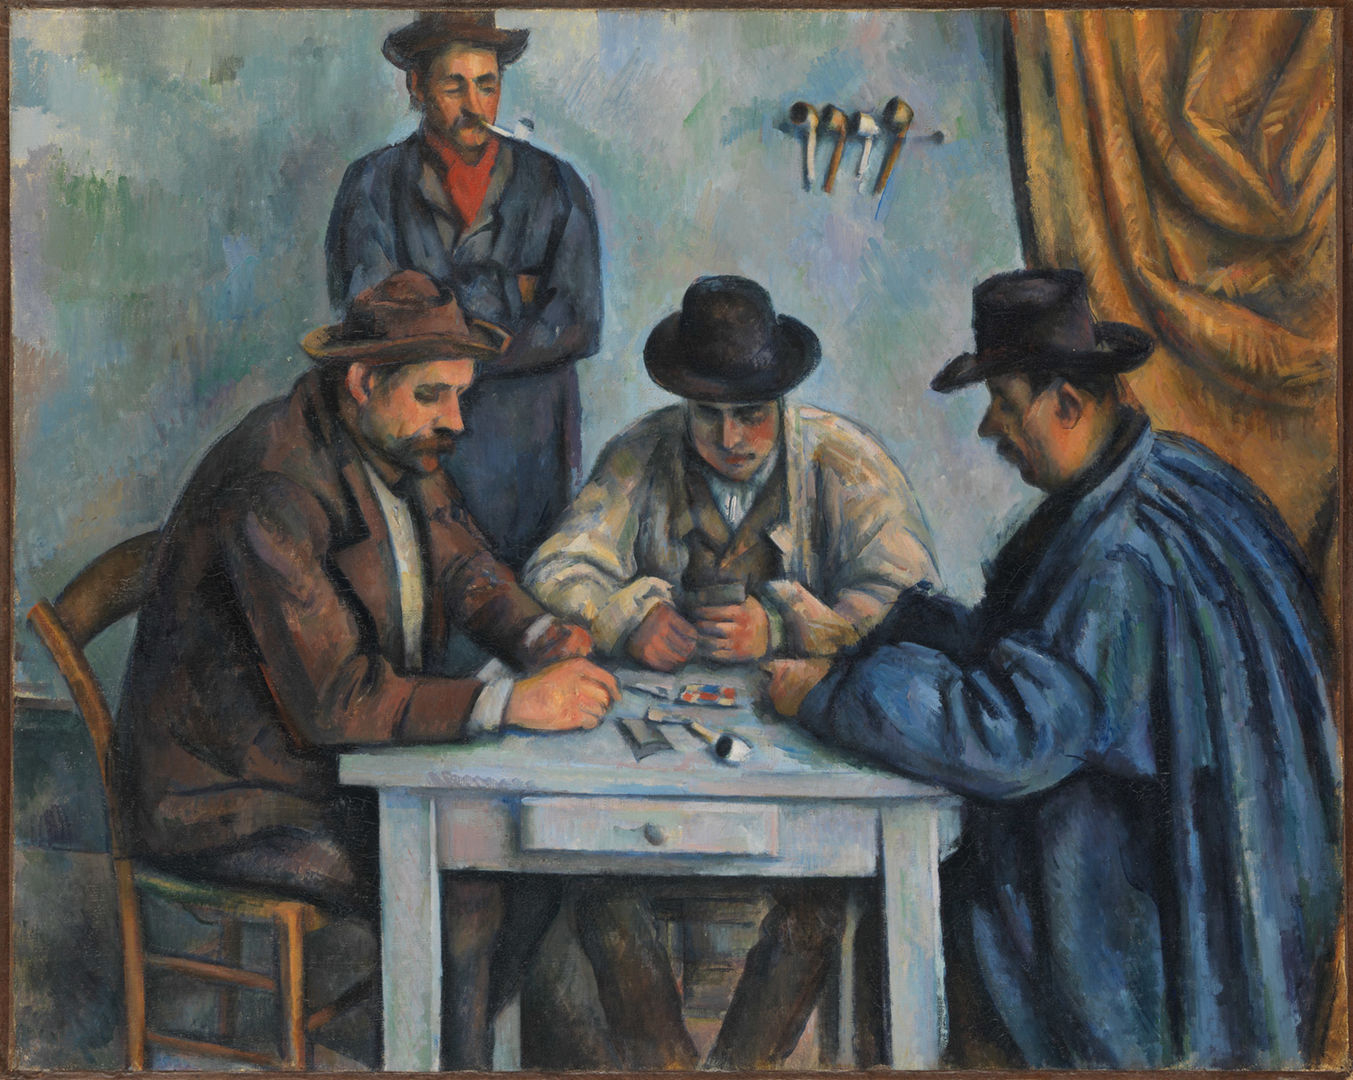 Detail of The Card Players by Cezanne. This oil painting depicts three men with hats seated at a small blue table playing cards while a fourth man stands behind them watching them play. A heavy yellow curtain hangs on the left side of a room with blue walls.